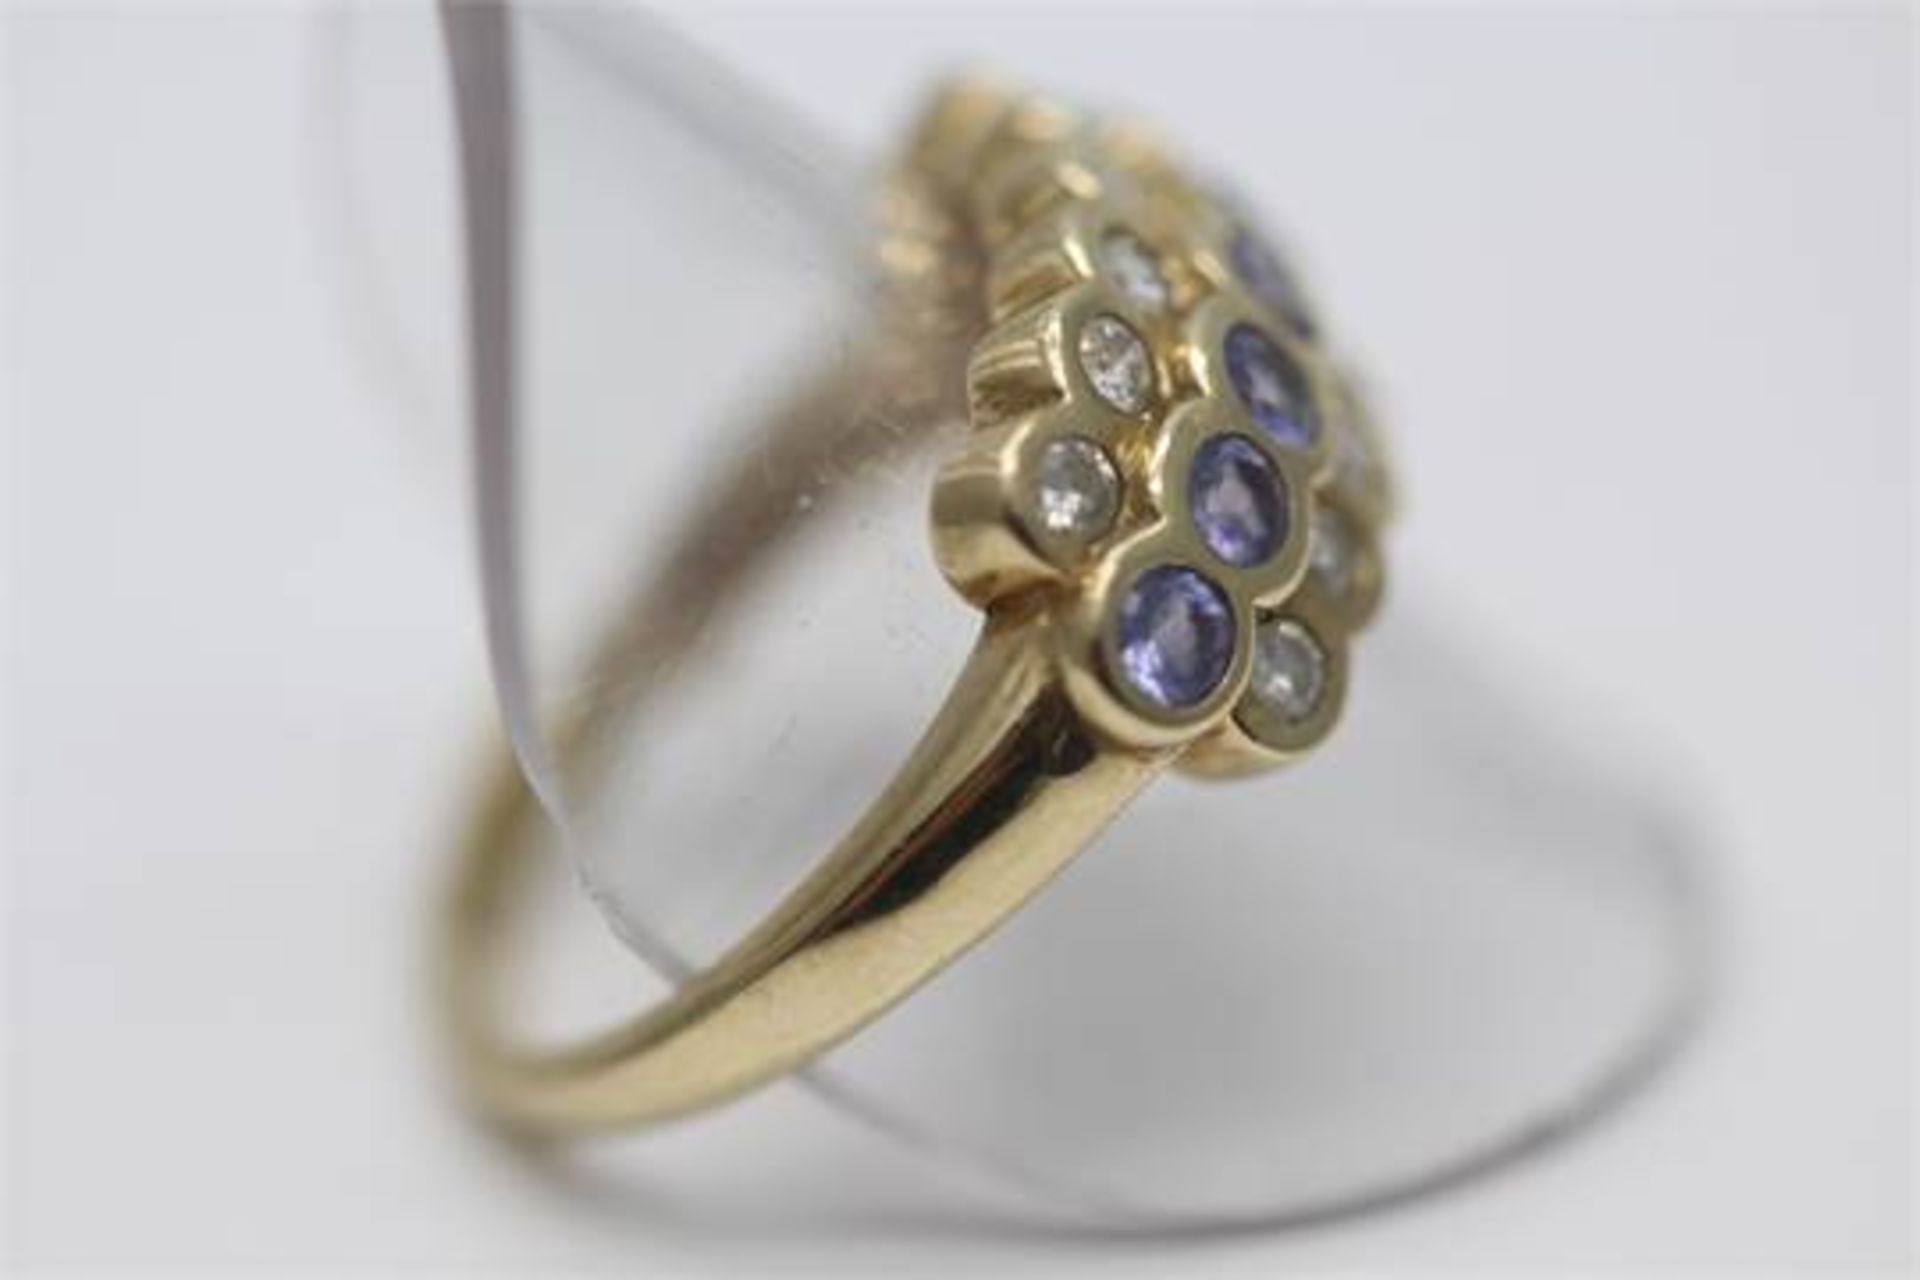 SOLID YELLOW GOLD VERY UNIQUE LADIES RING SET WITH 1.00 CARATS OF DIAMONDS AND TANZANITE (PV-JH) - Image 2 of 2